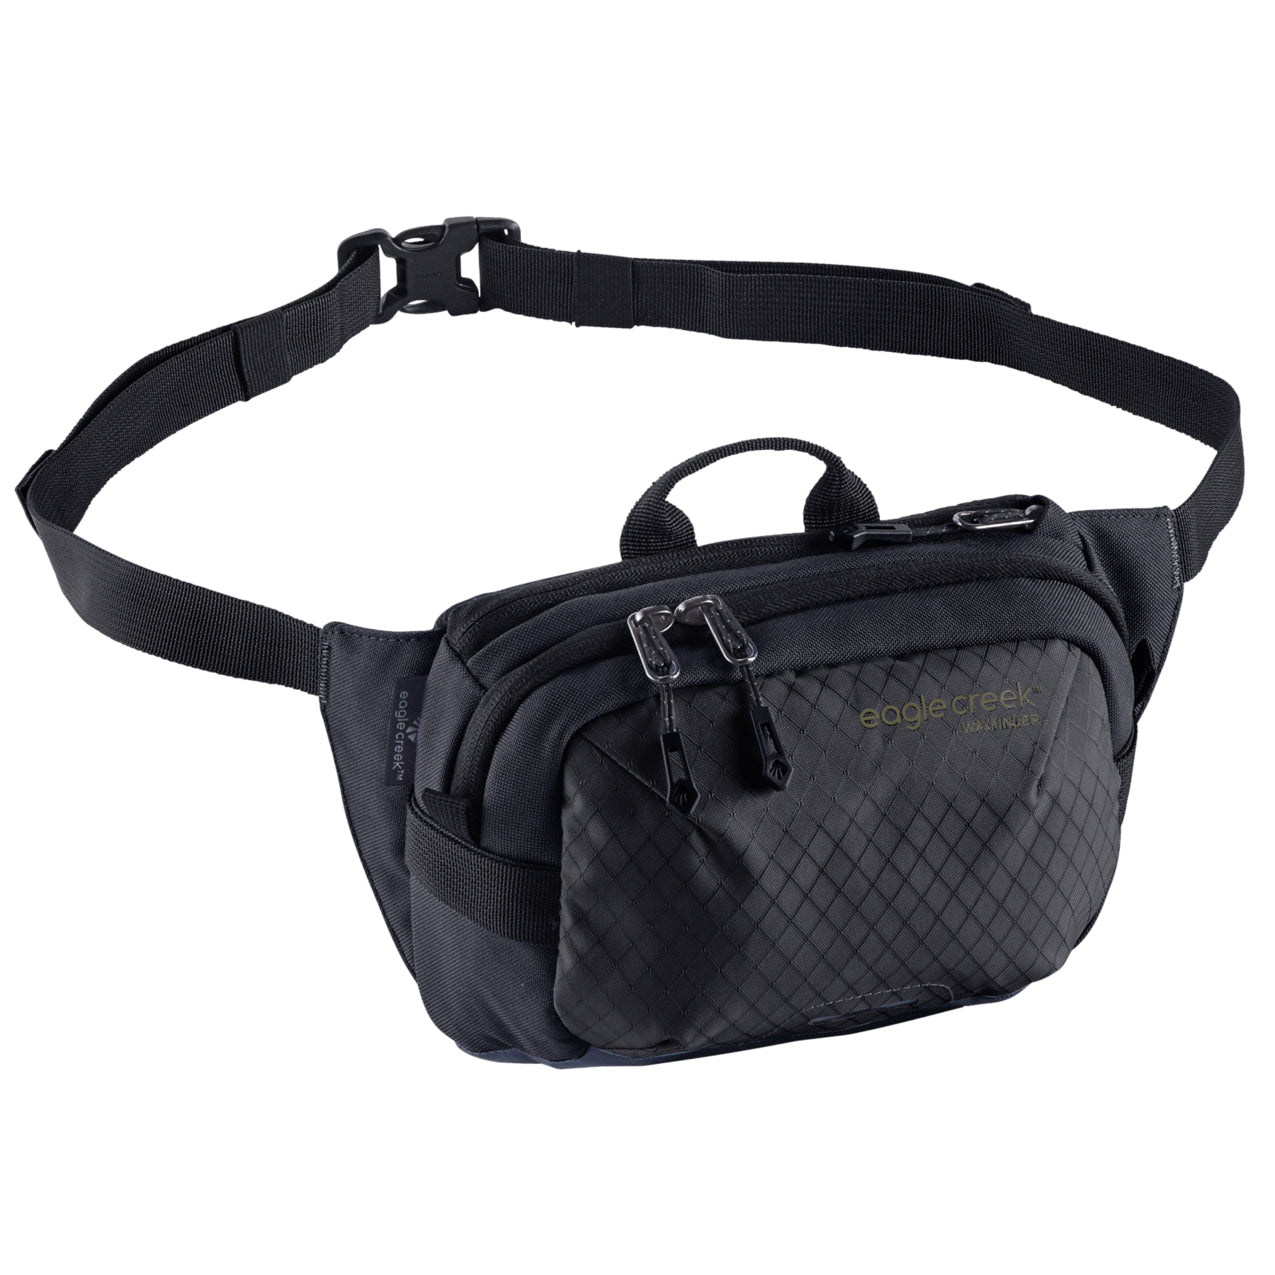 Unisex Eagle Creek Wayfinder Small Waist Pack in Jet Black from the front